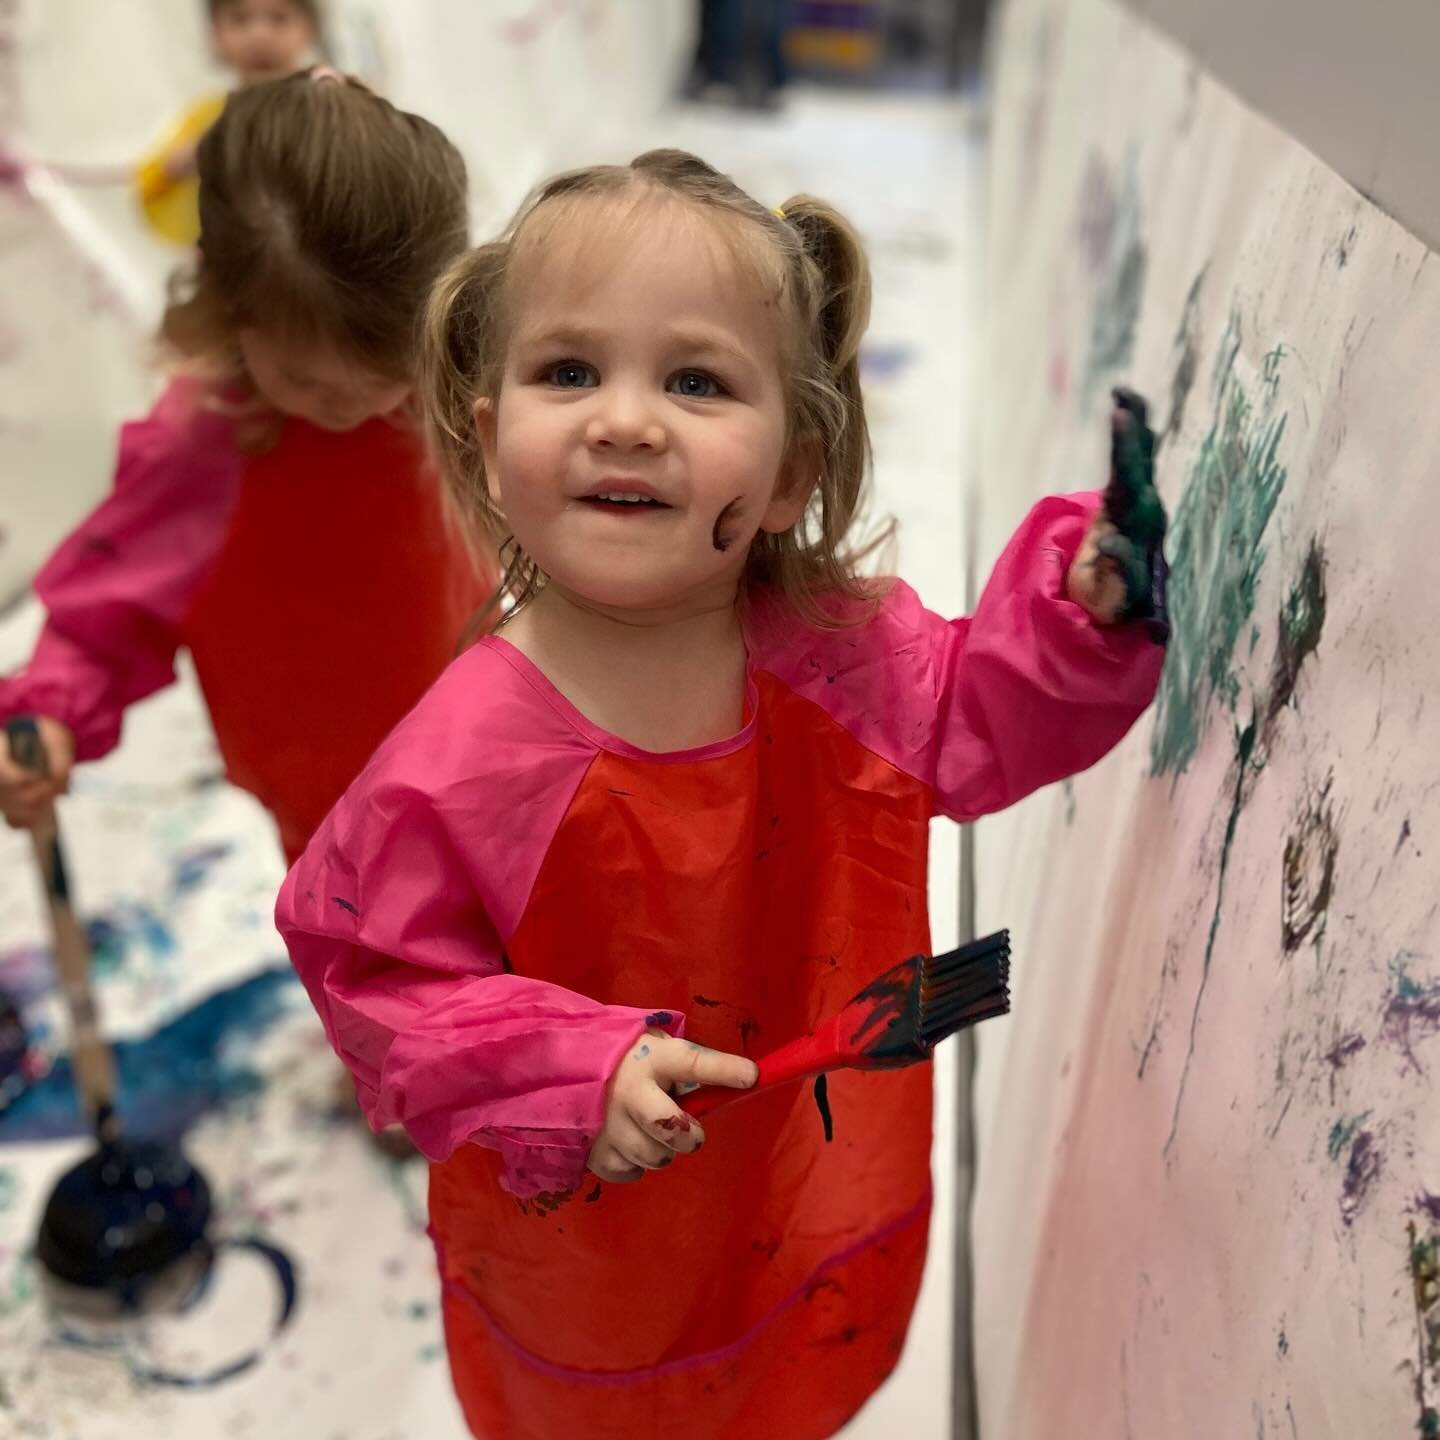 Week of the Young Child is underway and it&rsquo;s &ldquo;Artsy Thursday&rdquo;! Stay tuned for more as we finish out the week celebrating with &ldquo;underwater&rdquo; adventures, tasty treats, music days, fashion shows, and more! #weekoftheyoungchi